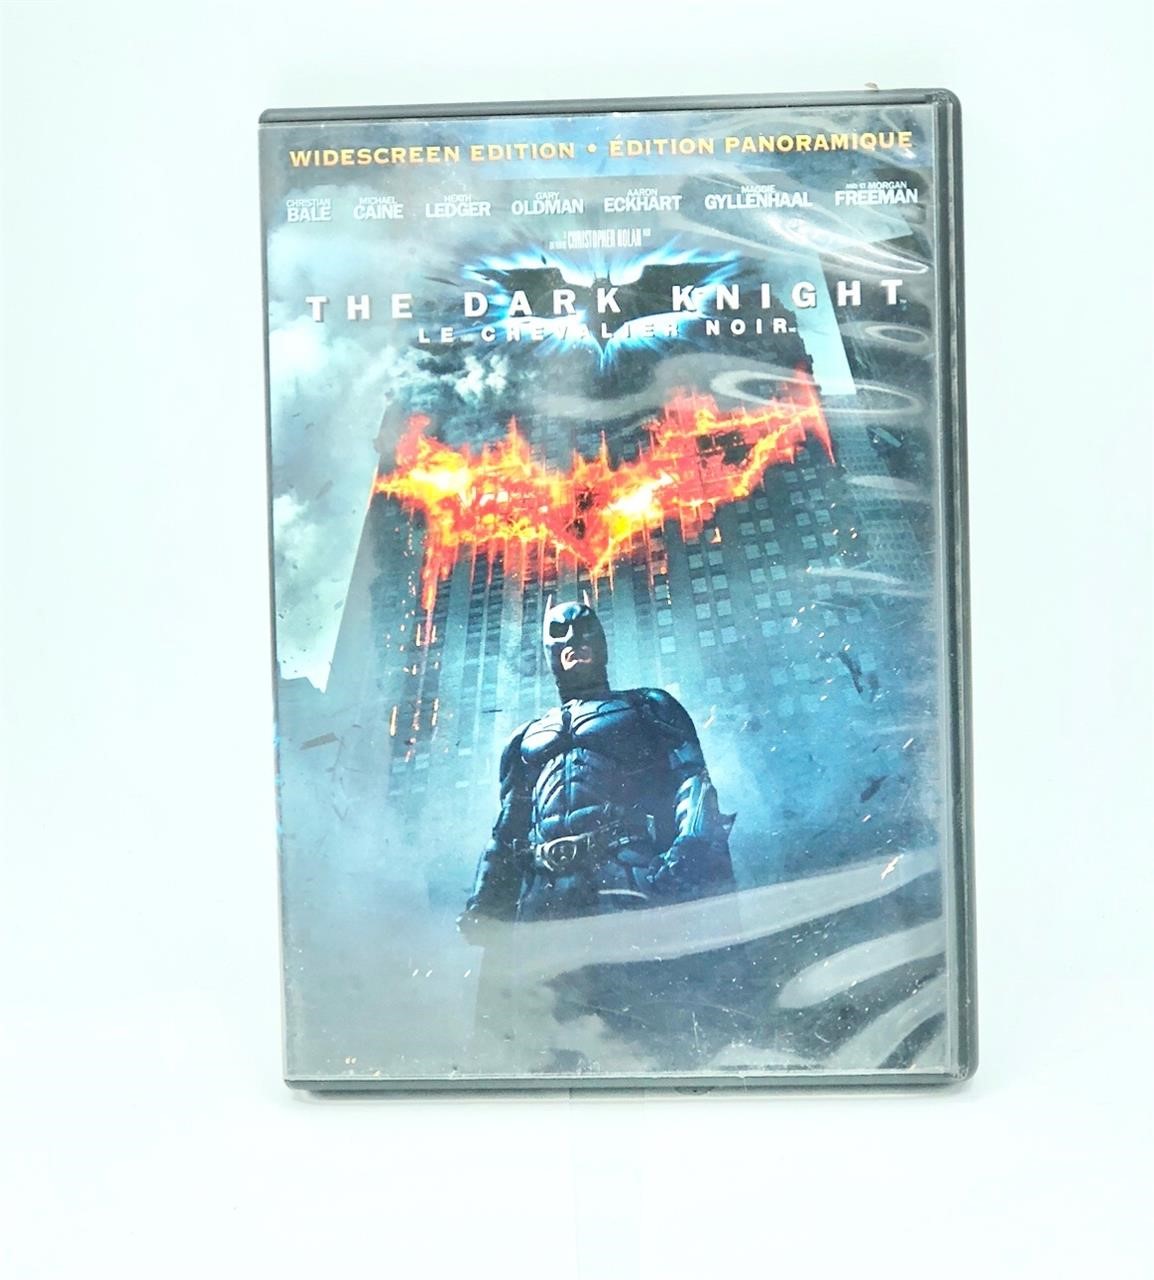 The Dark Knight wide edition DVD previously viewed